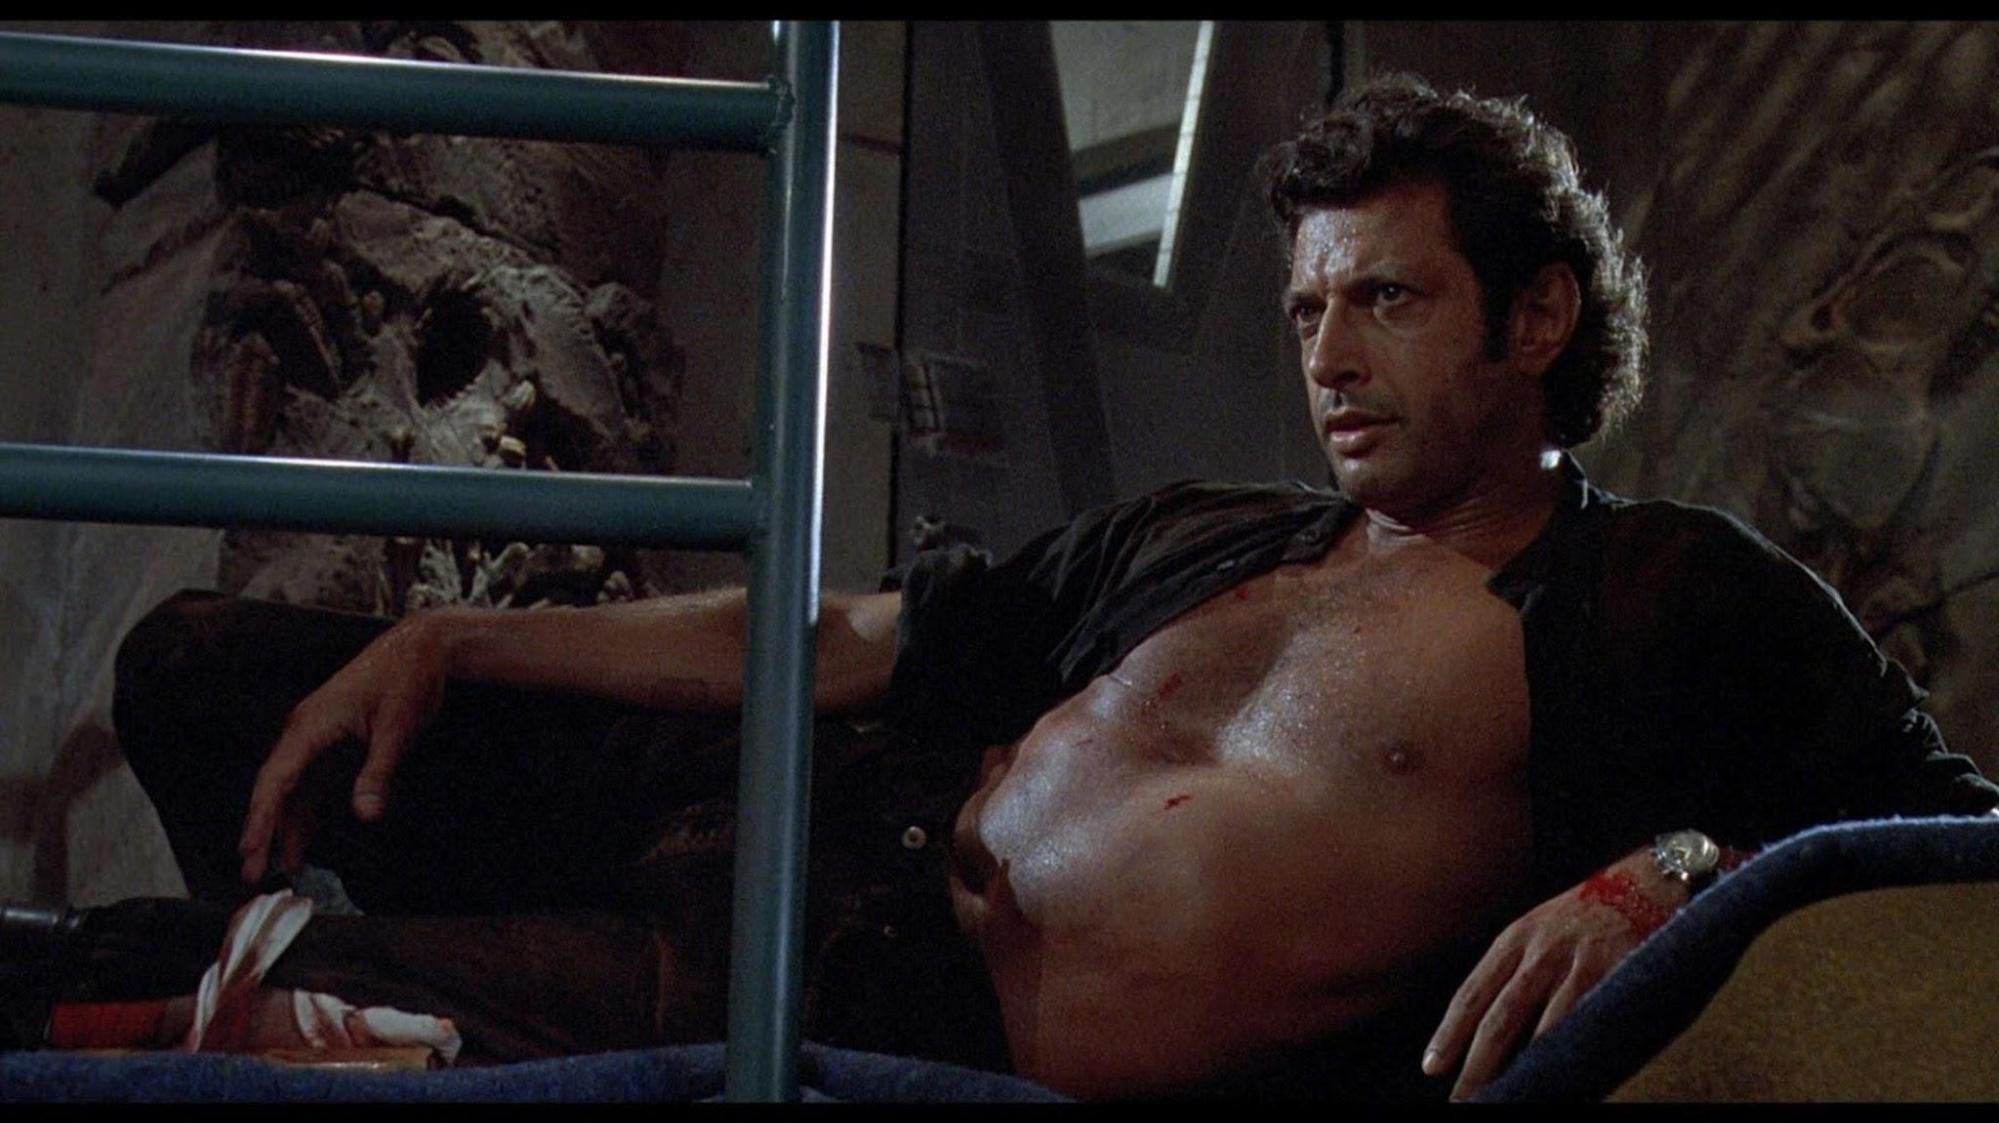 Jeff Goldblum reclines with his shirt unbuttoned and his sweaty chest exposed